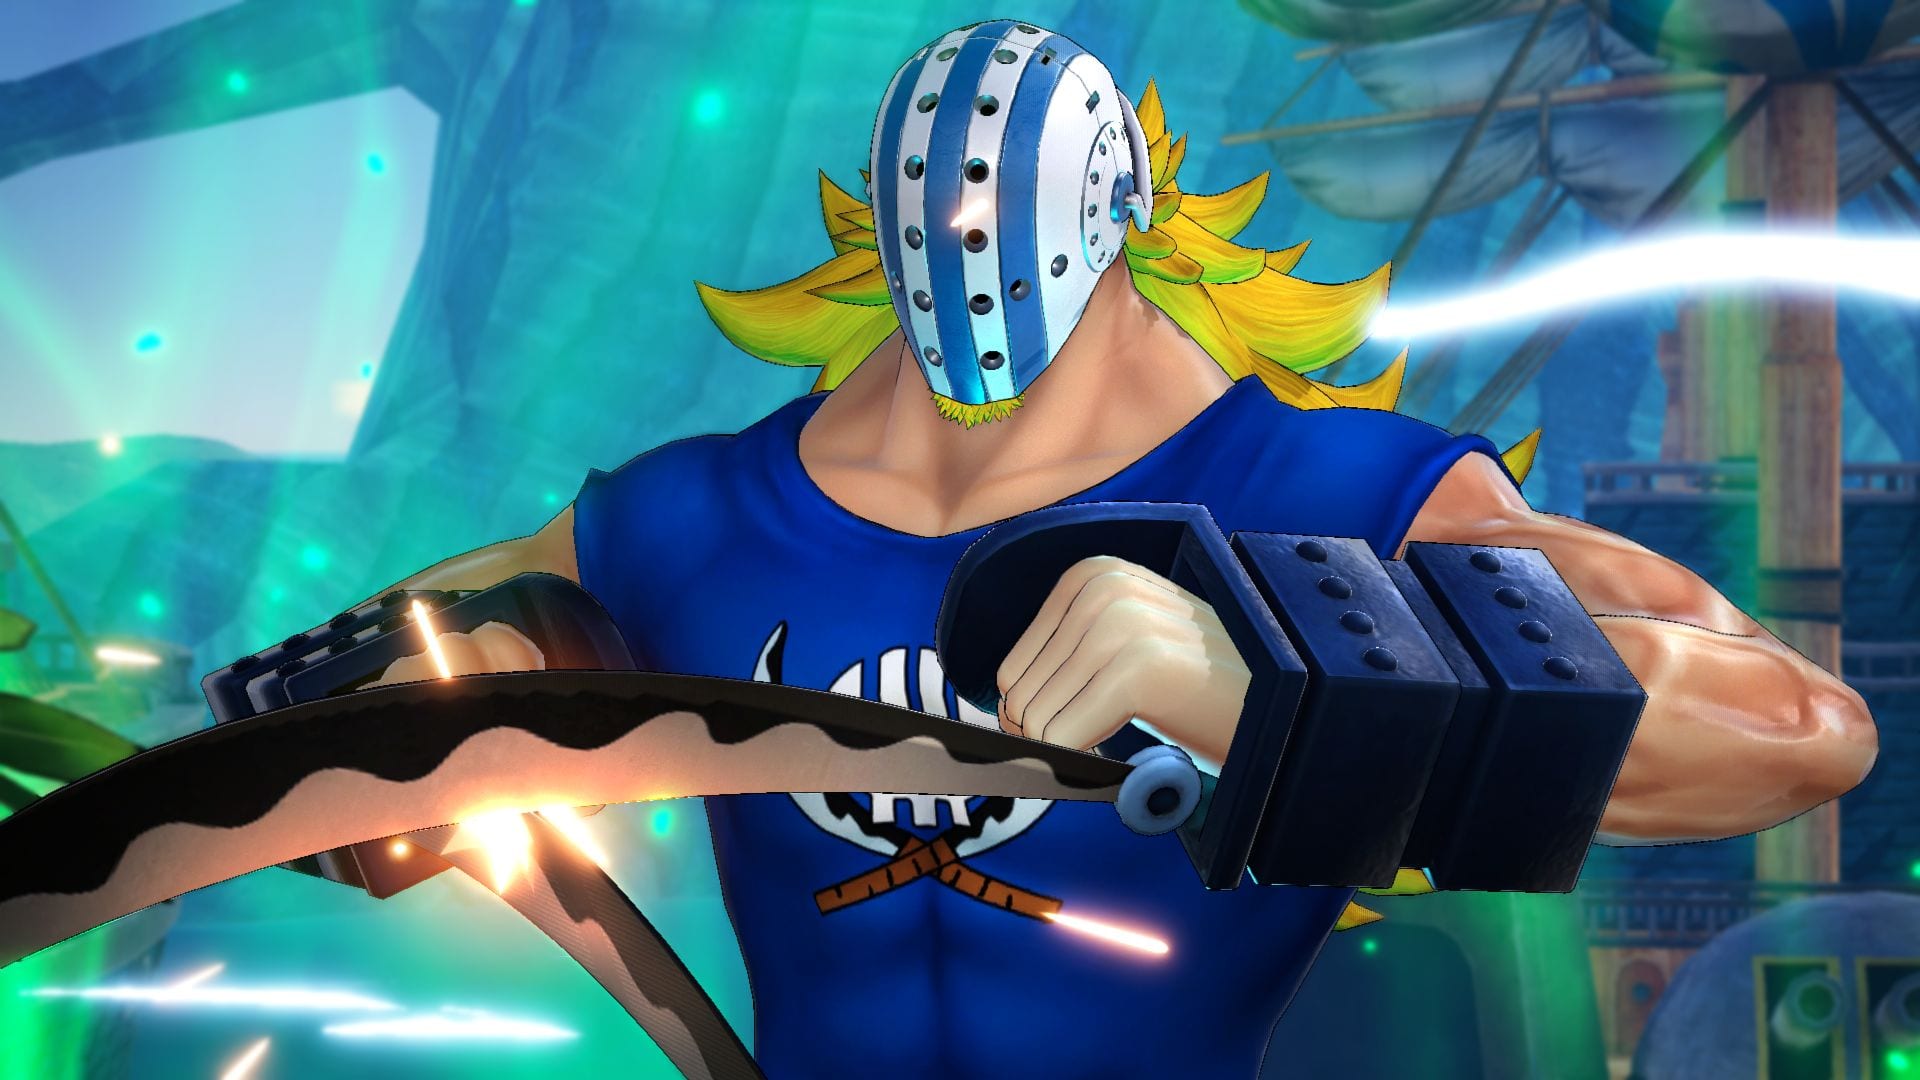 One Piece: Pirate Warriors 4 Reveals Killer as New DLC Character With First Screenshots